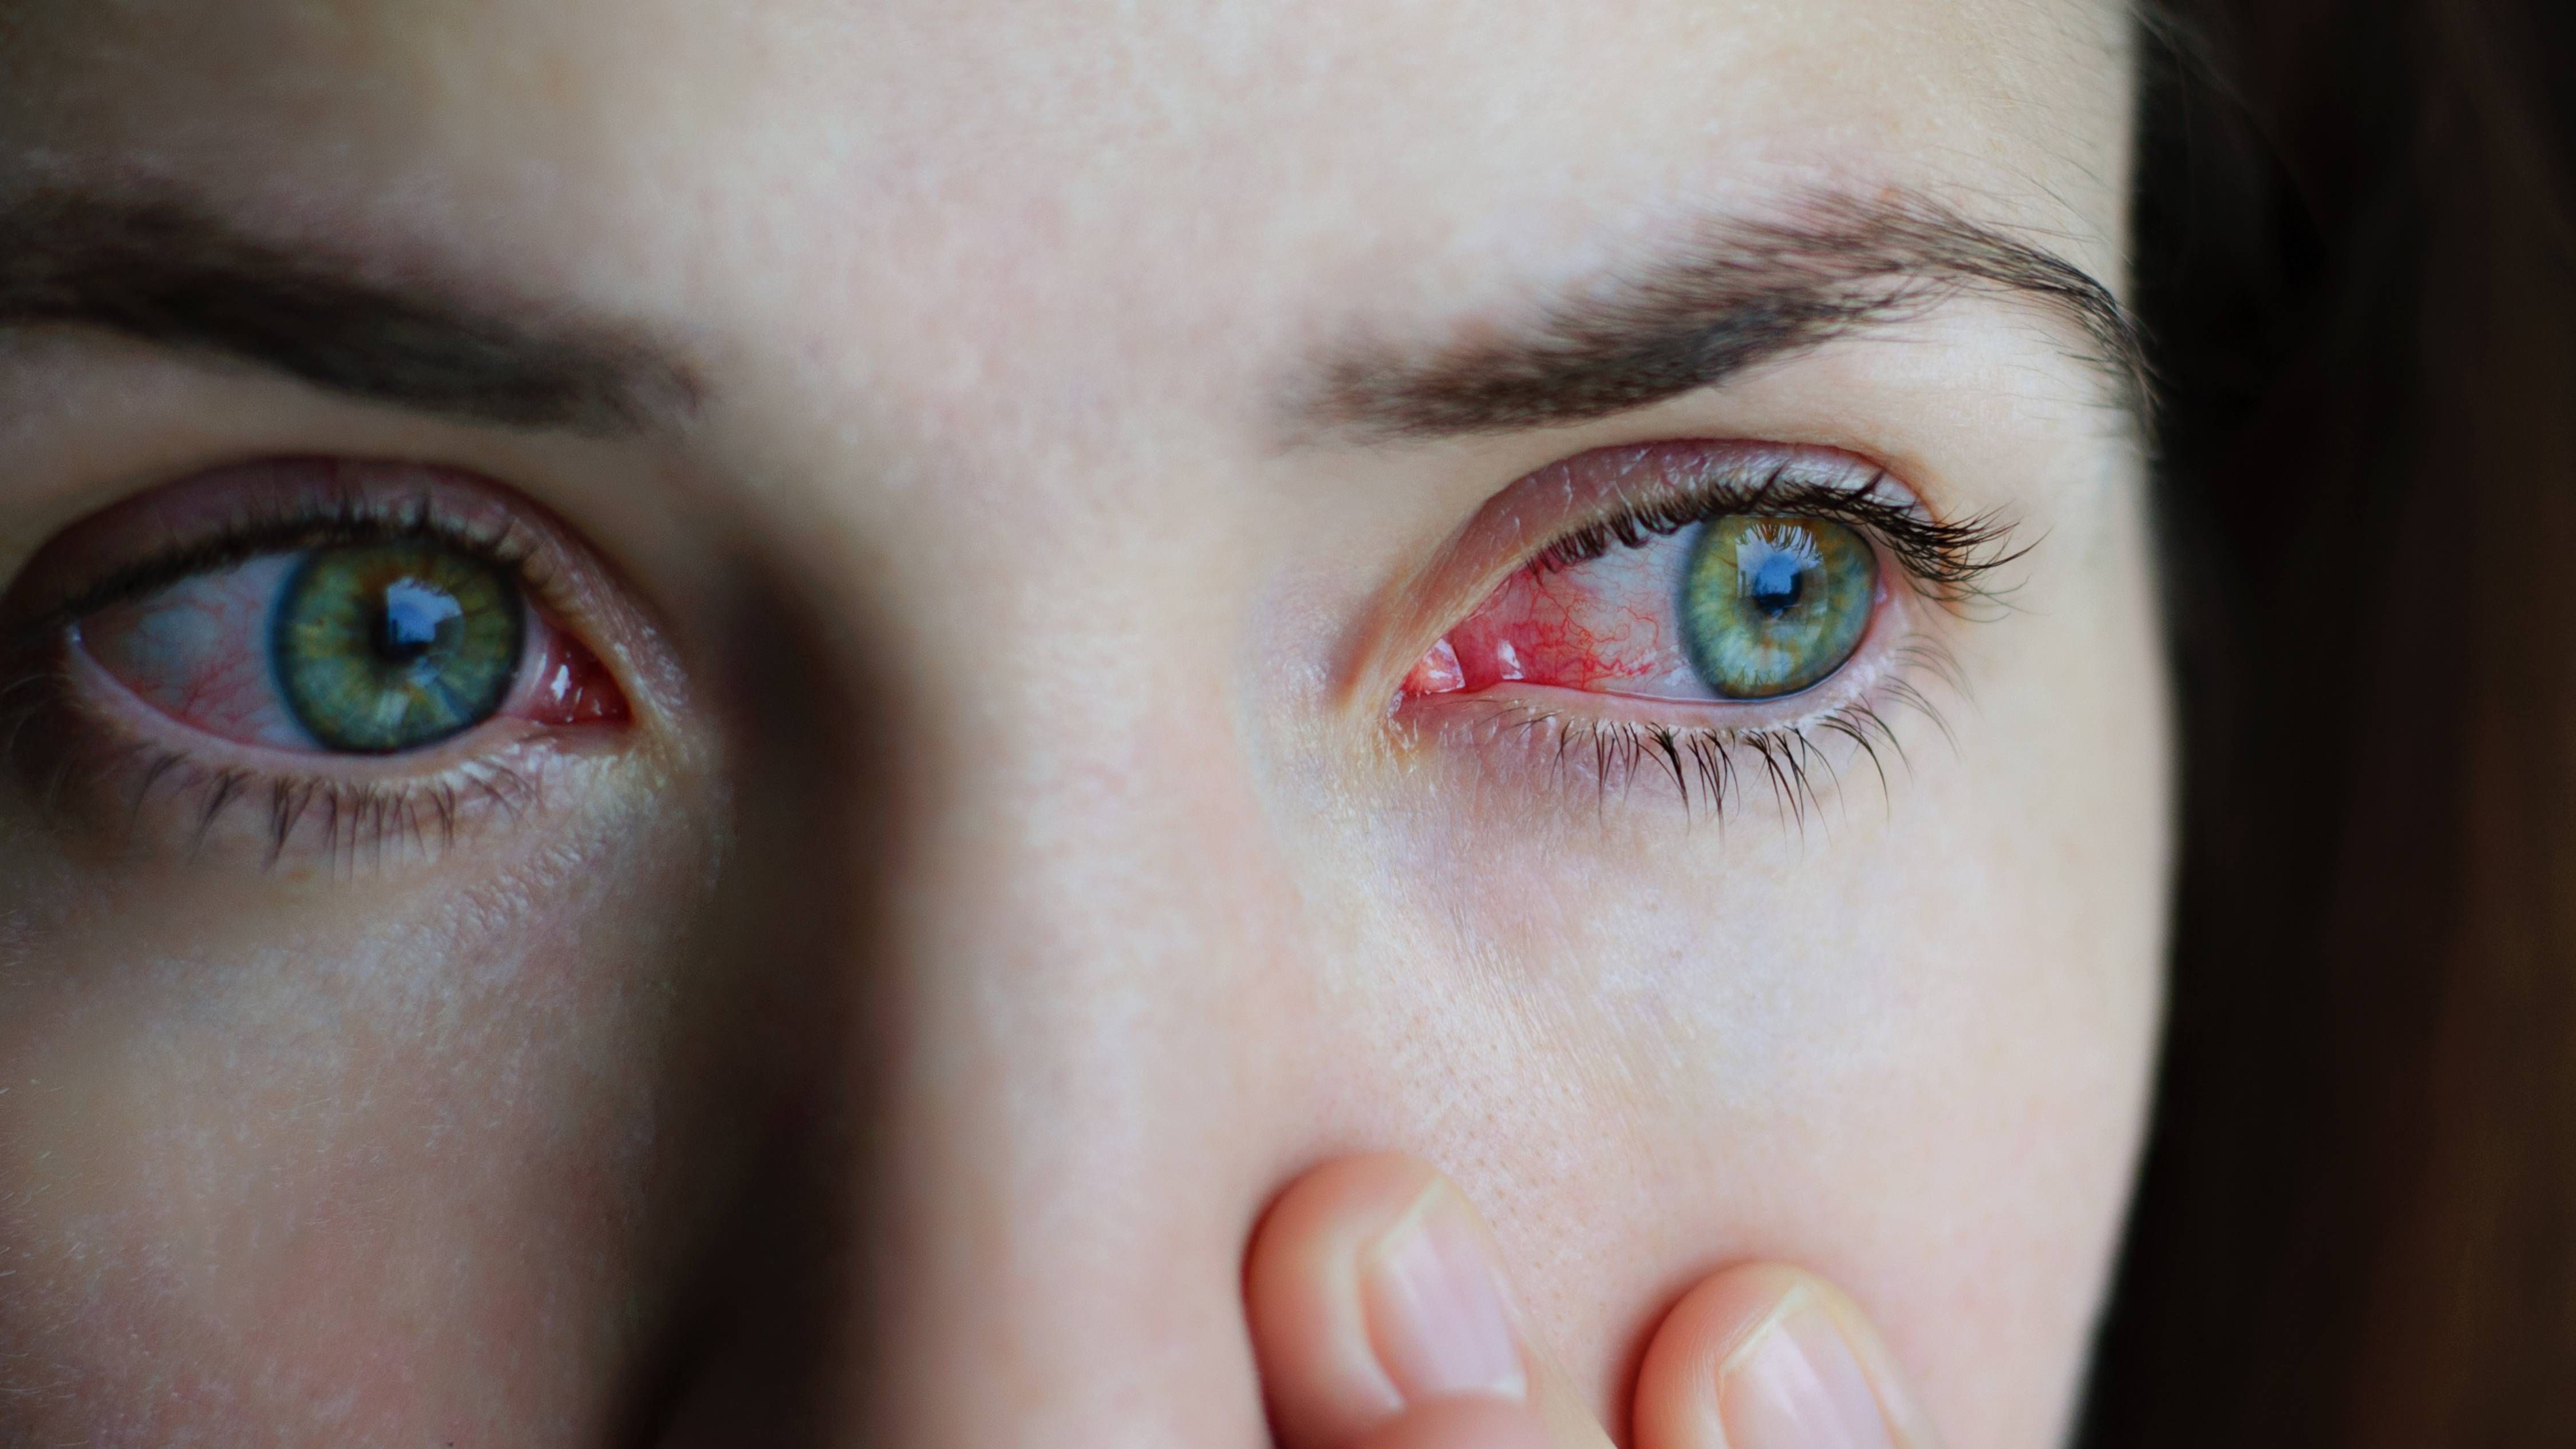 Potentially Dangerous Eye Problems You Should Not Ignore